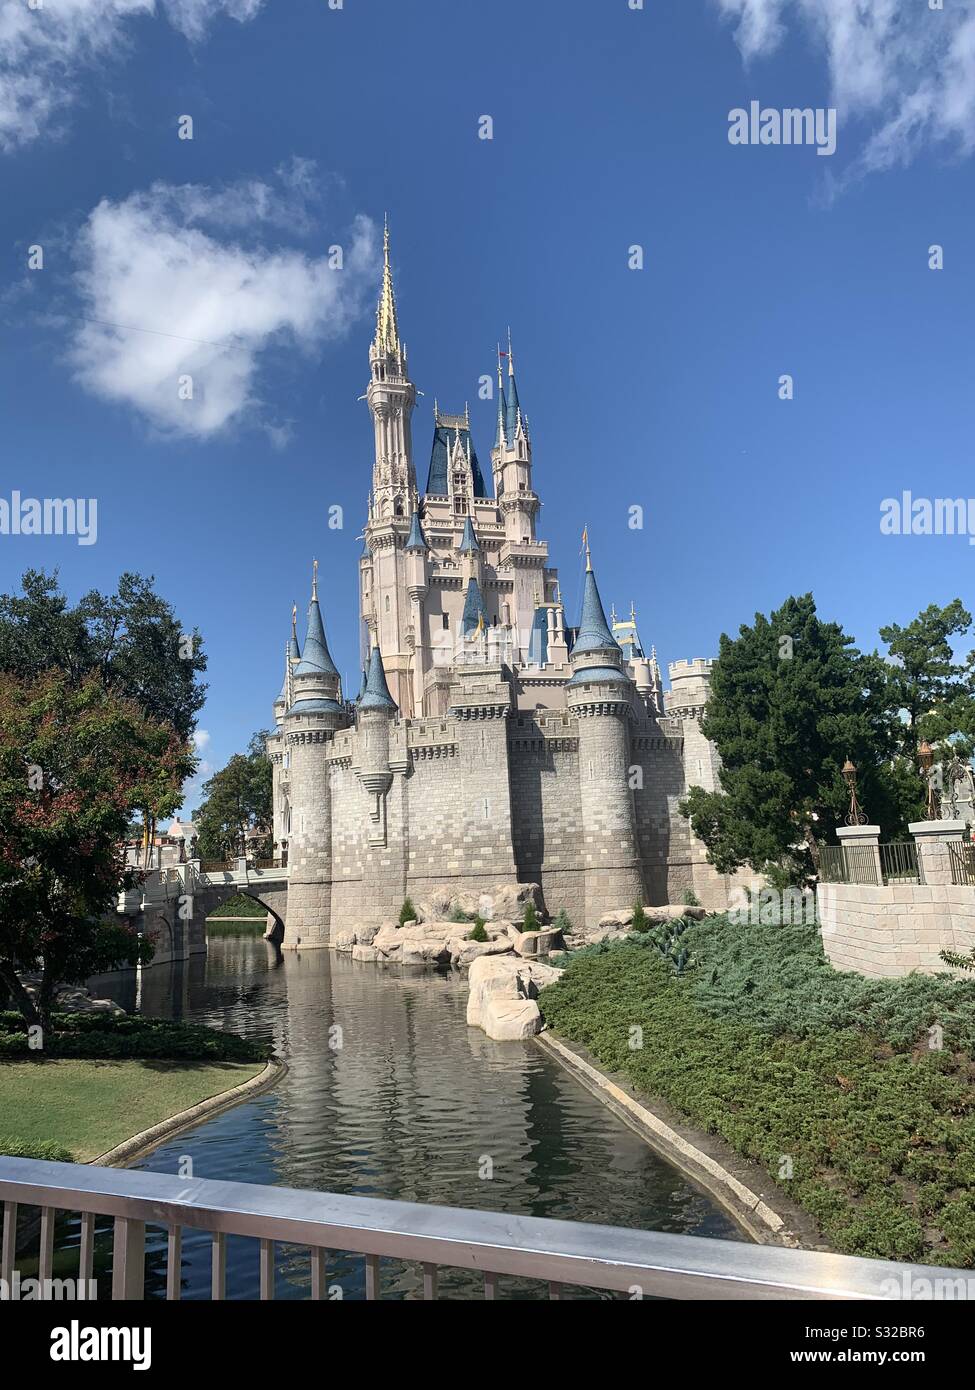 Disney castle with blue sky and clouds Stock Photo